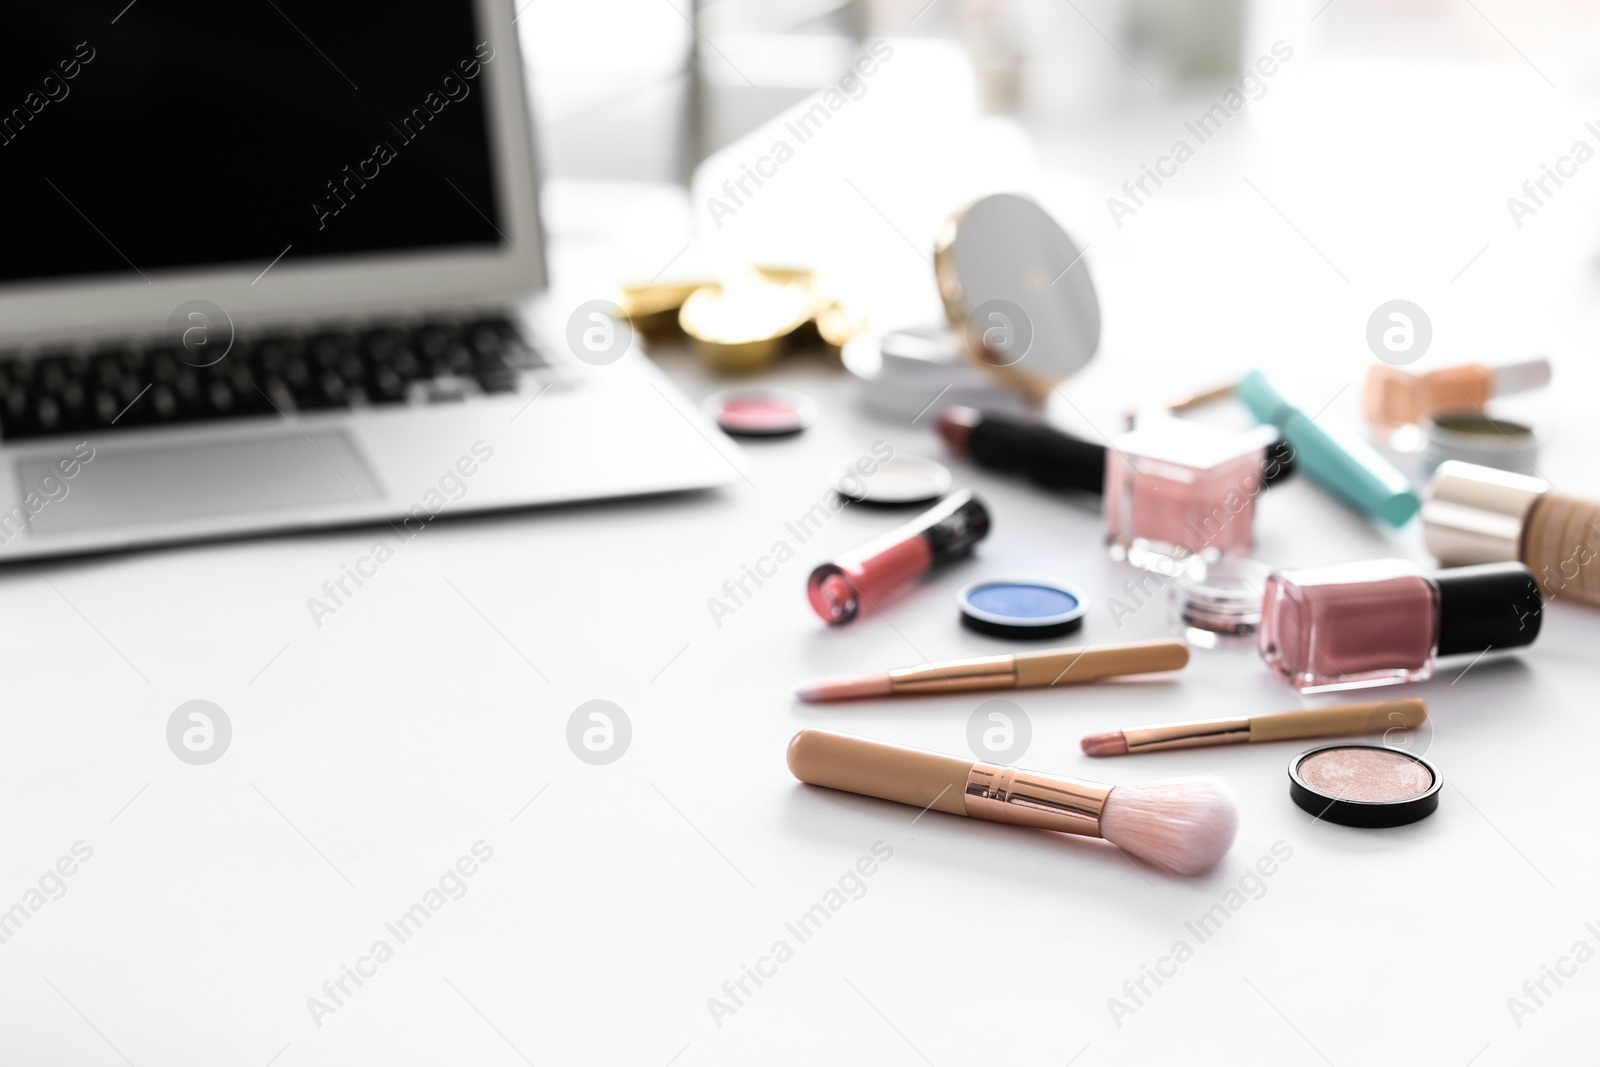 Photo of Makeup products for woman and laptop on table